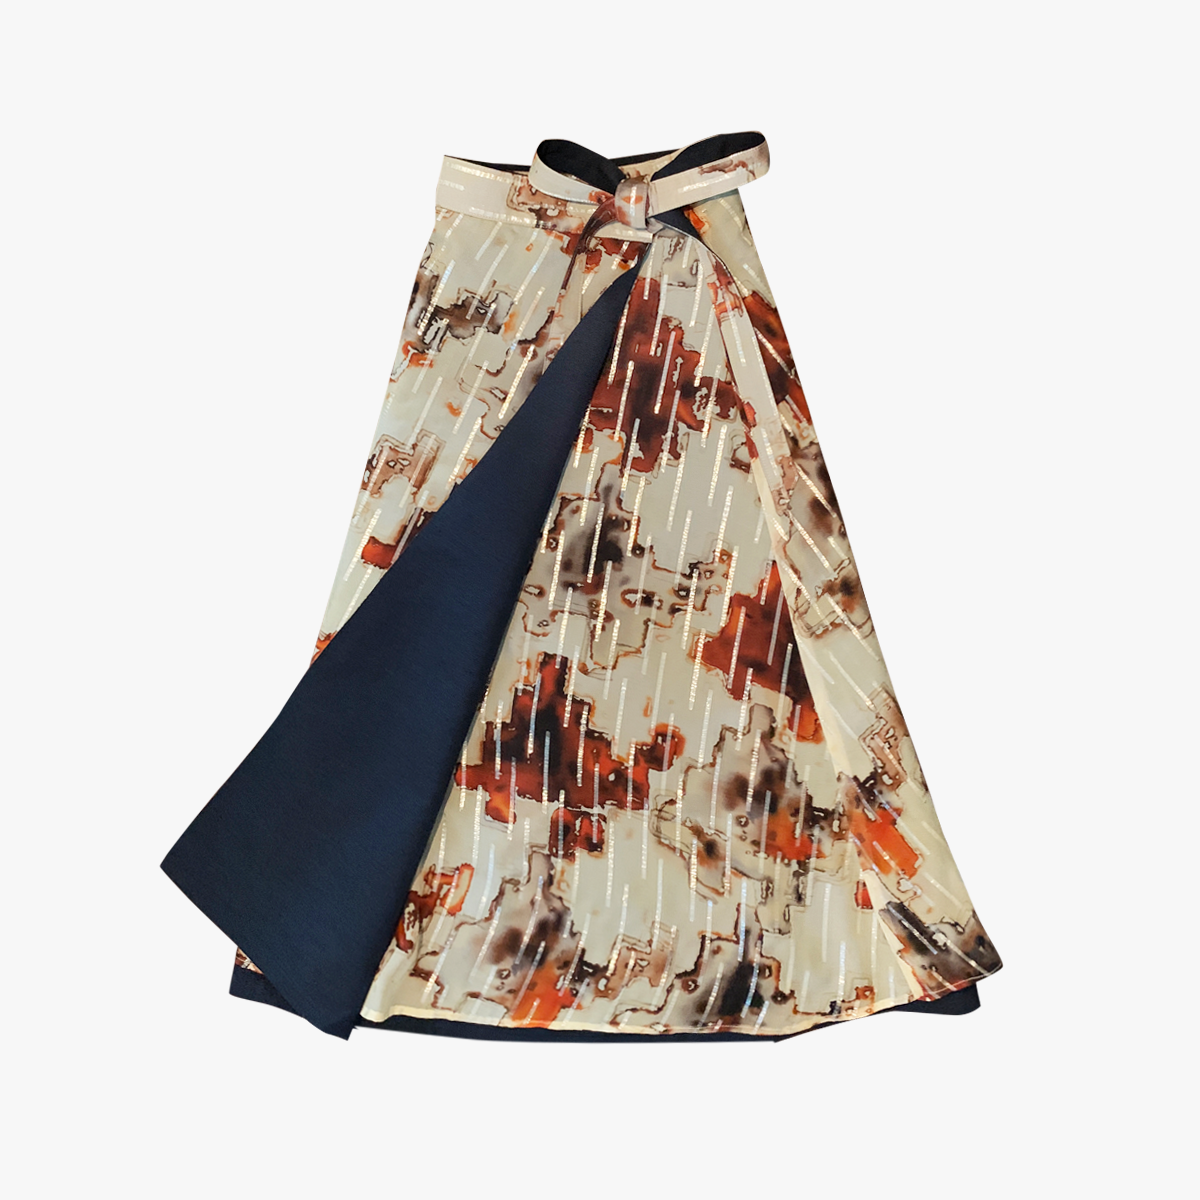 Reversible Skirt Flare - Autunno